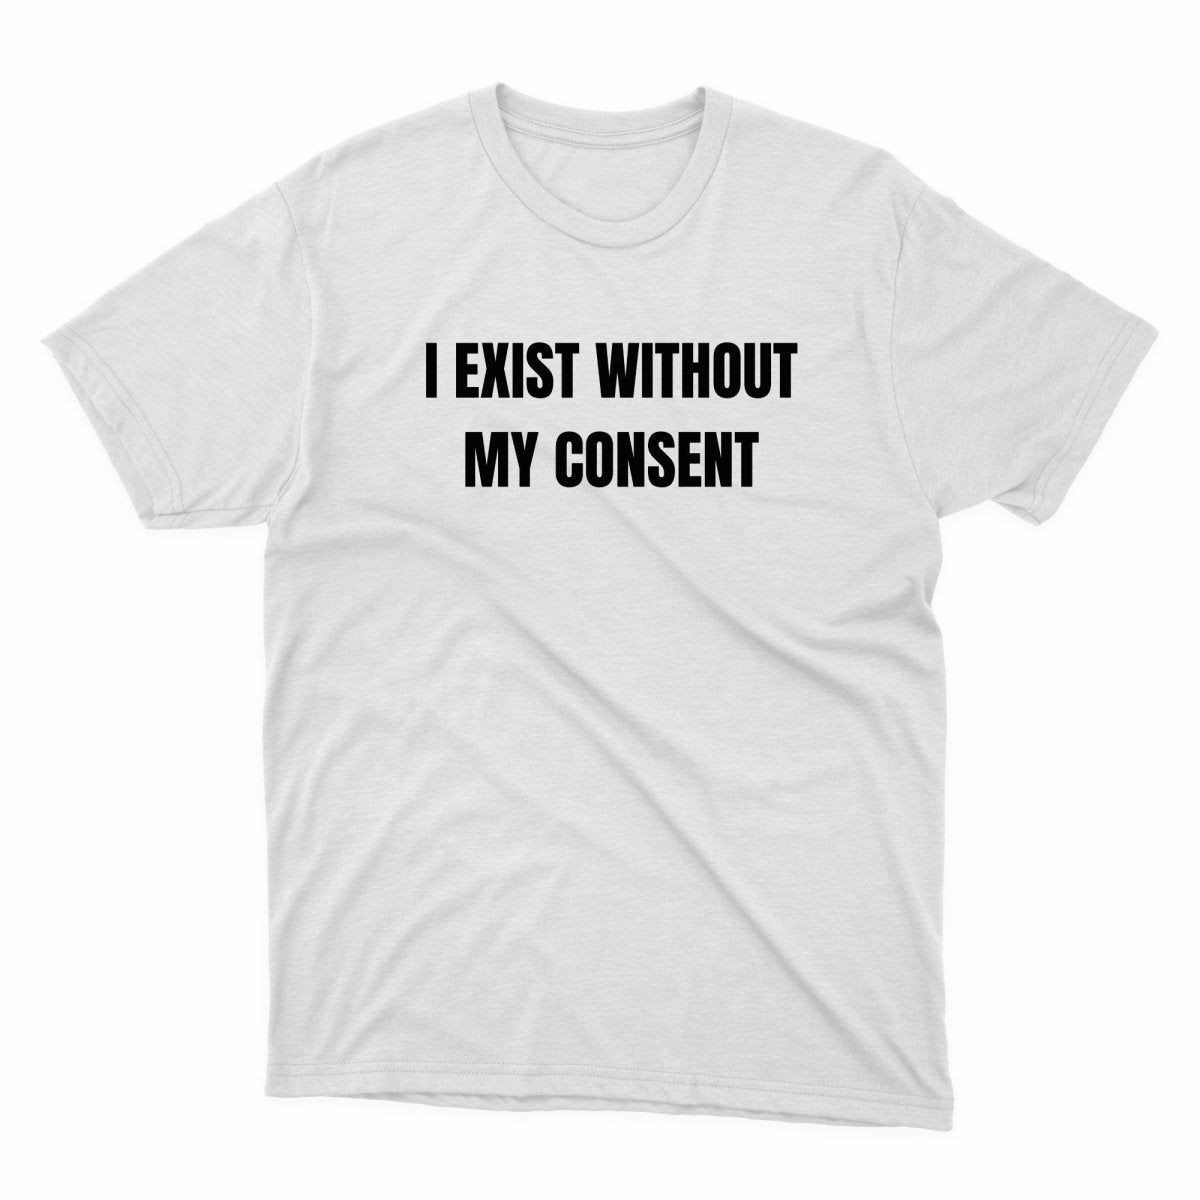 I Exist Without My Consent Shirt - stickerbullI Exist Without My Consent ShirtShirtsPrintifystickerbull26137915718996856715WhiteSa white t - shirt that says i existt without my content